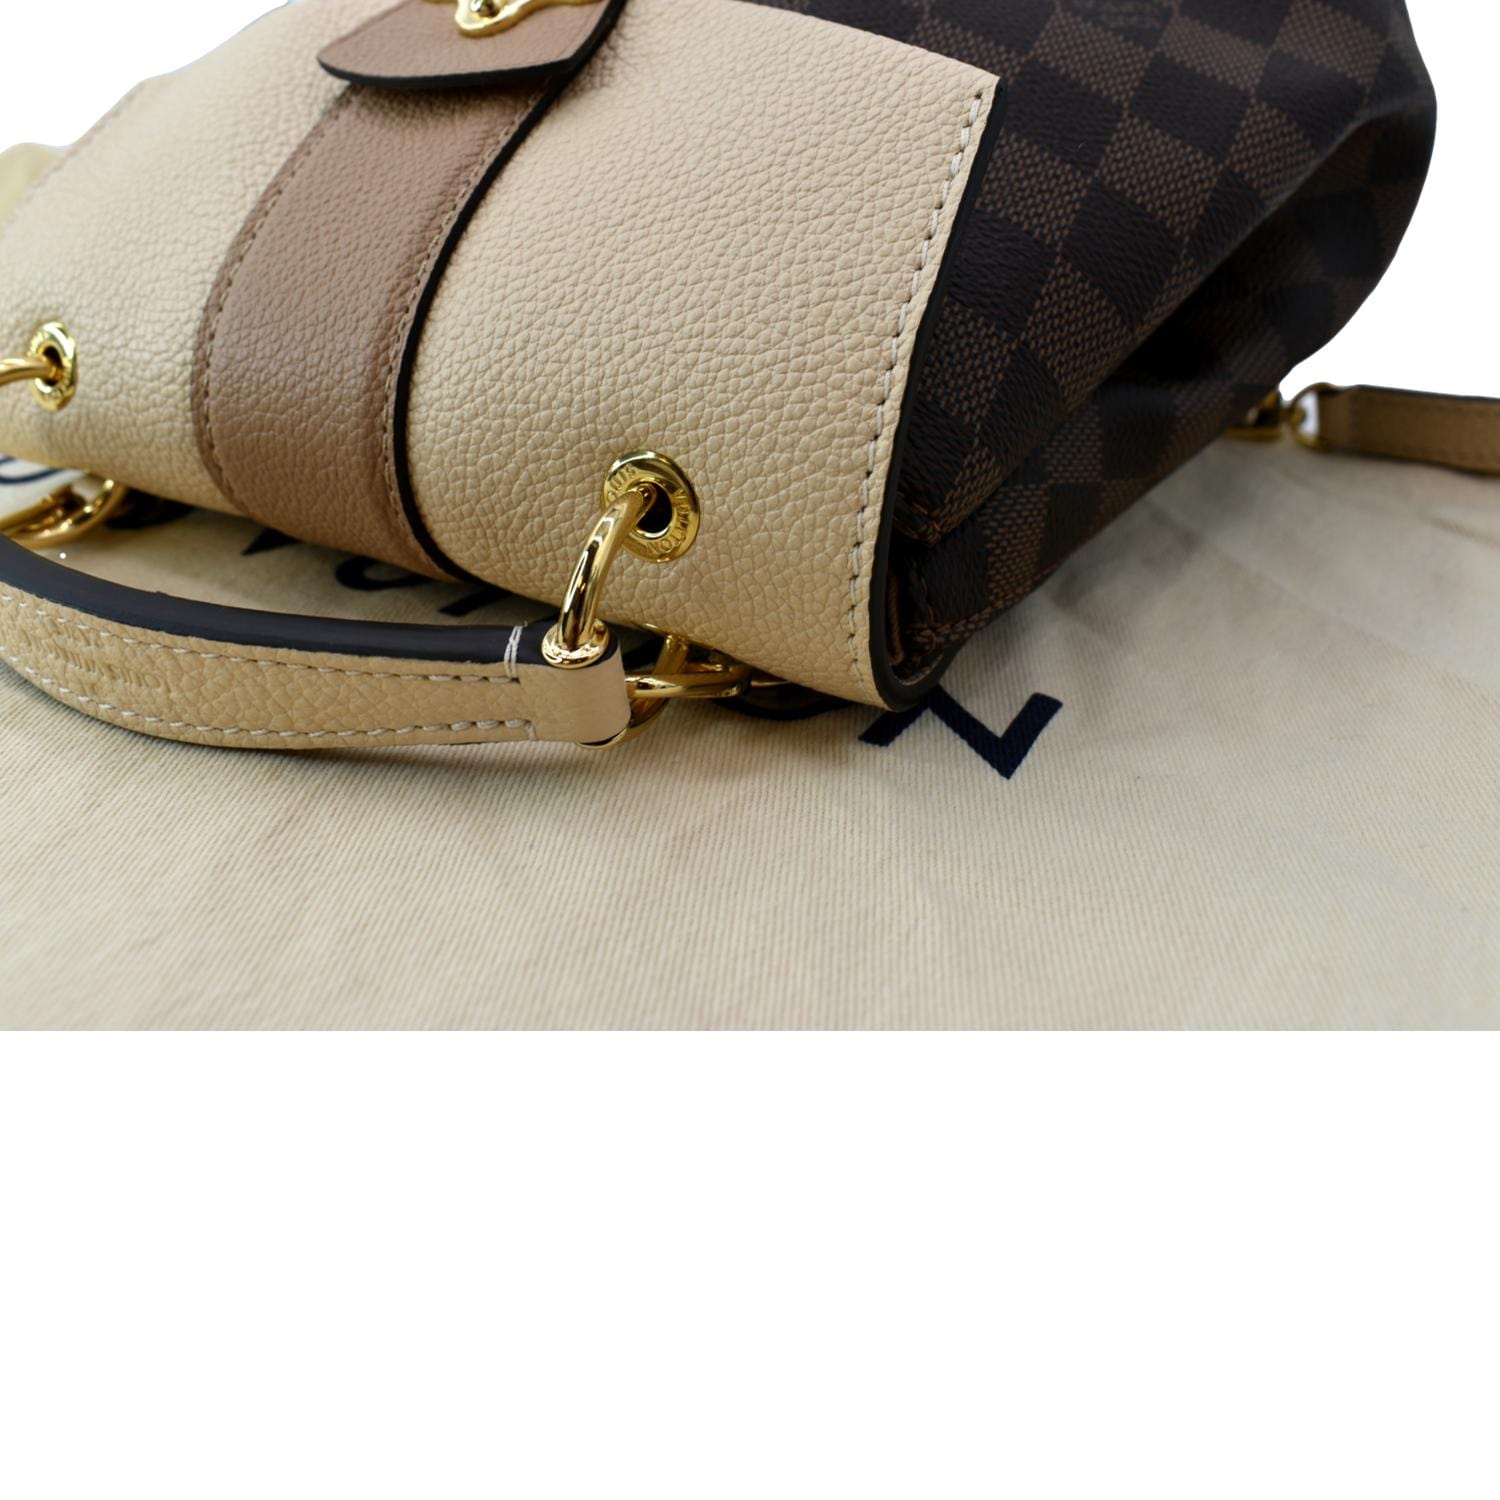 Luxe.It.Fwd on Instagram: Louis Vuitton Clapton Backpack Damier Ebene now  on luxeitfwd.com.au 🤎 Featuring damier ebene coated canvas exterior,  cowhide leather trim and hidden magnetic dome sides. This stylish everyday  bag is